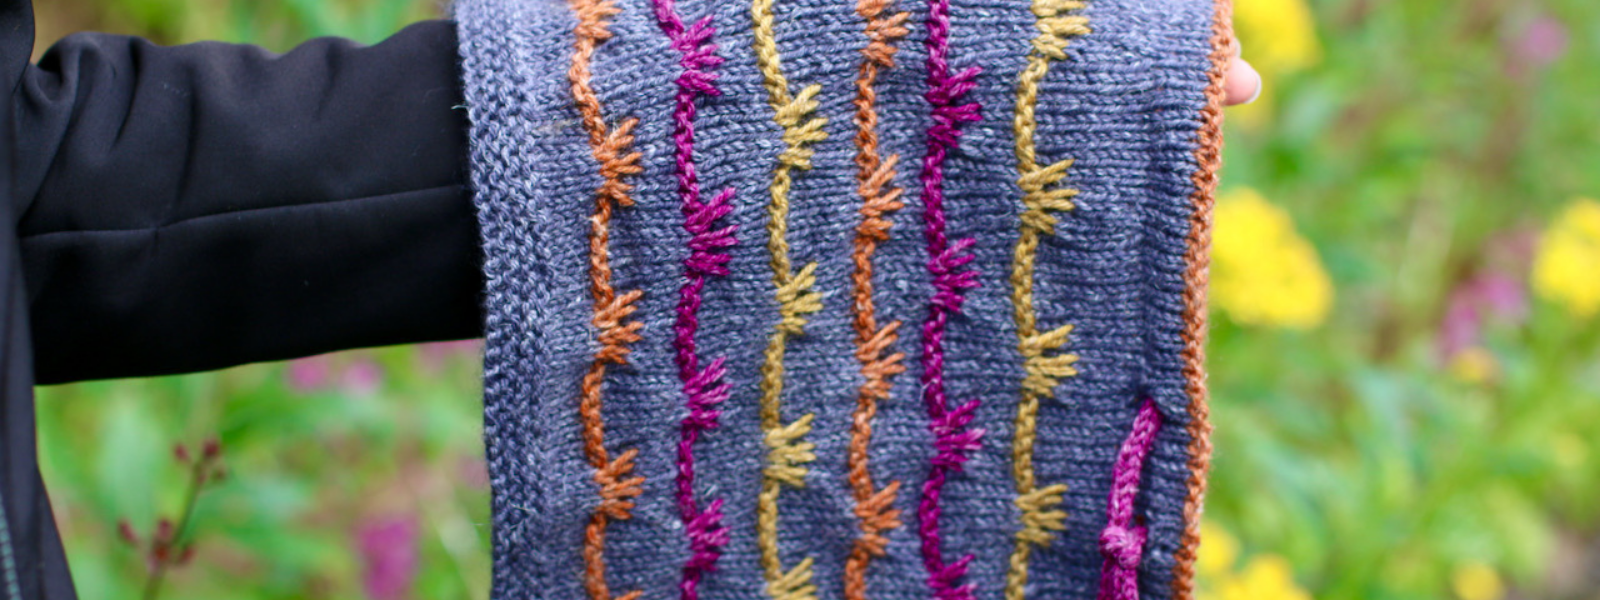 Knit Basics: A Look at I-cords in Knitting - Stolen Stitches